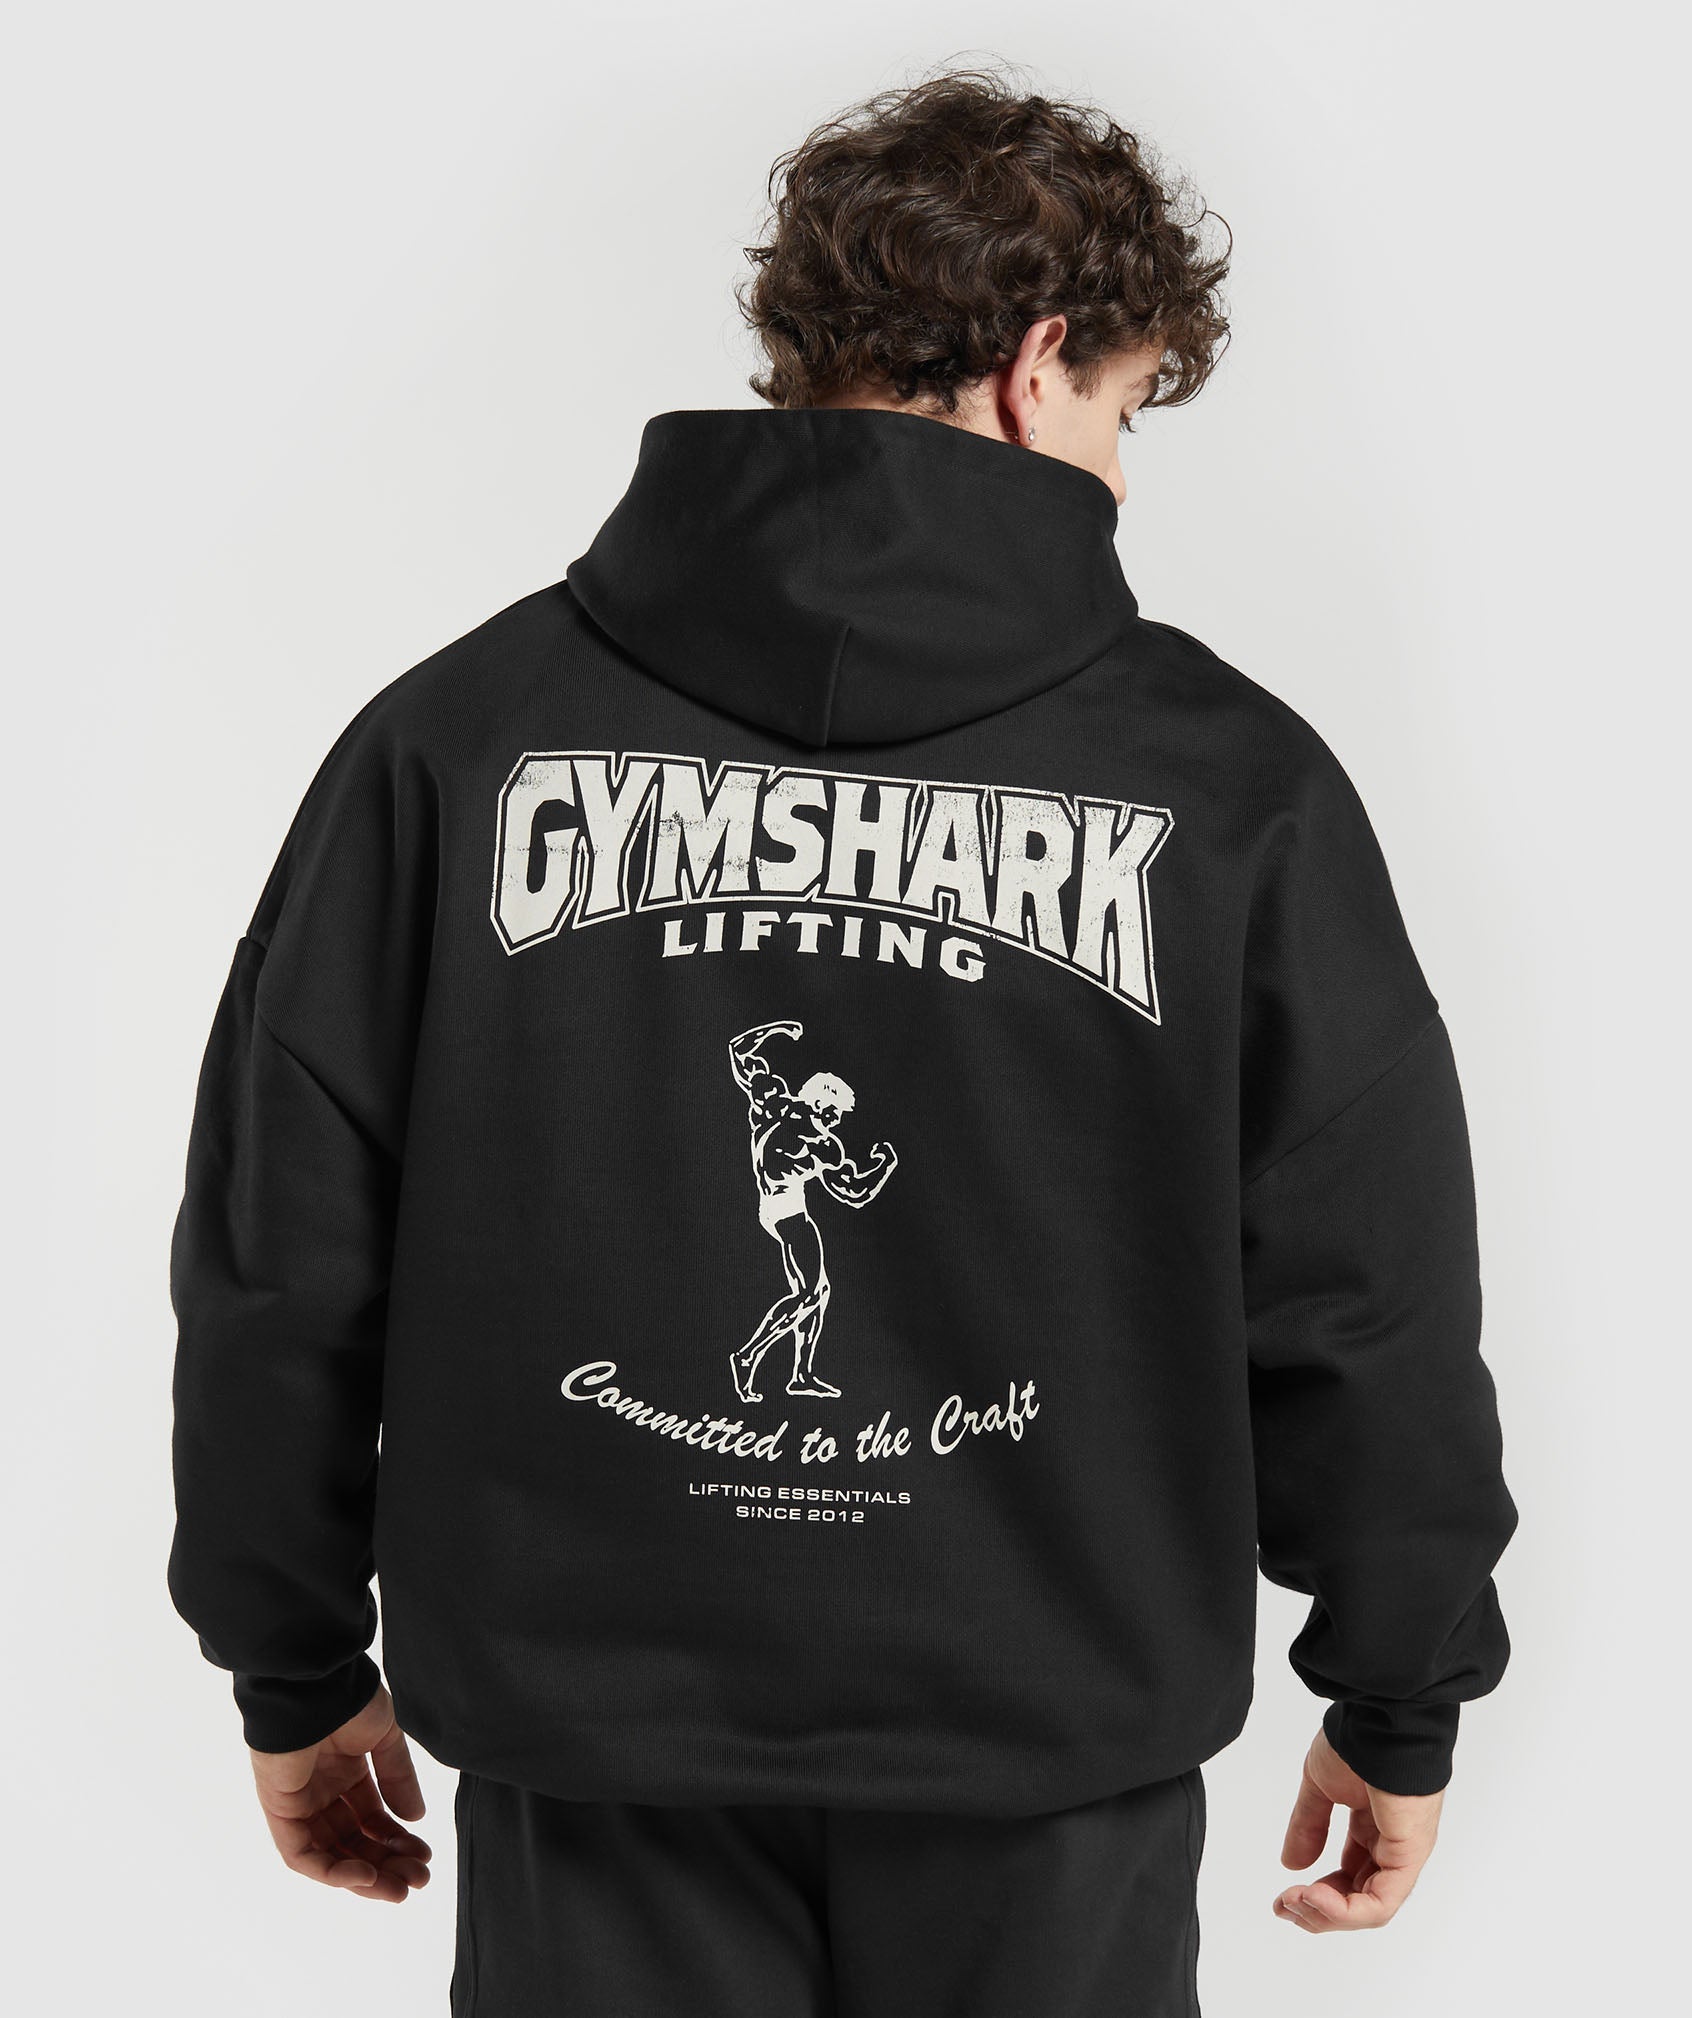 Gymshark Committed to the Craft Hoodie - Black